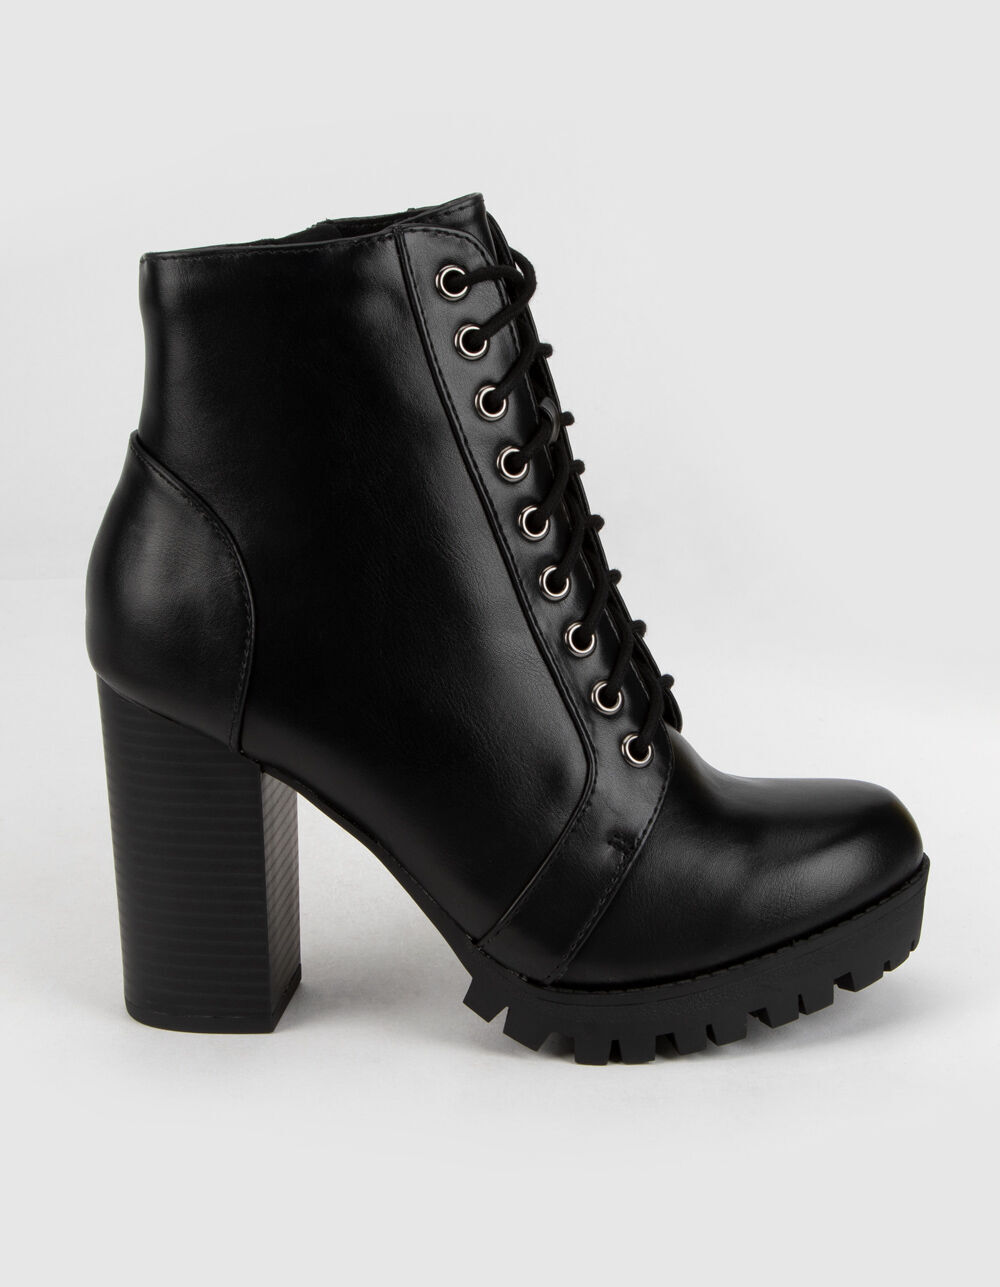 SODA Lace Up Womens Heeled Combat Boots - BLACK | Tillys